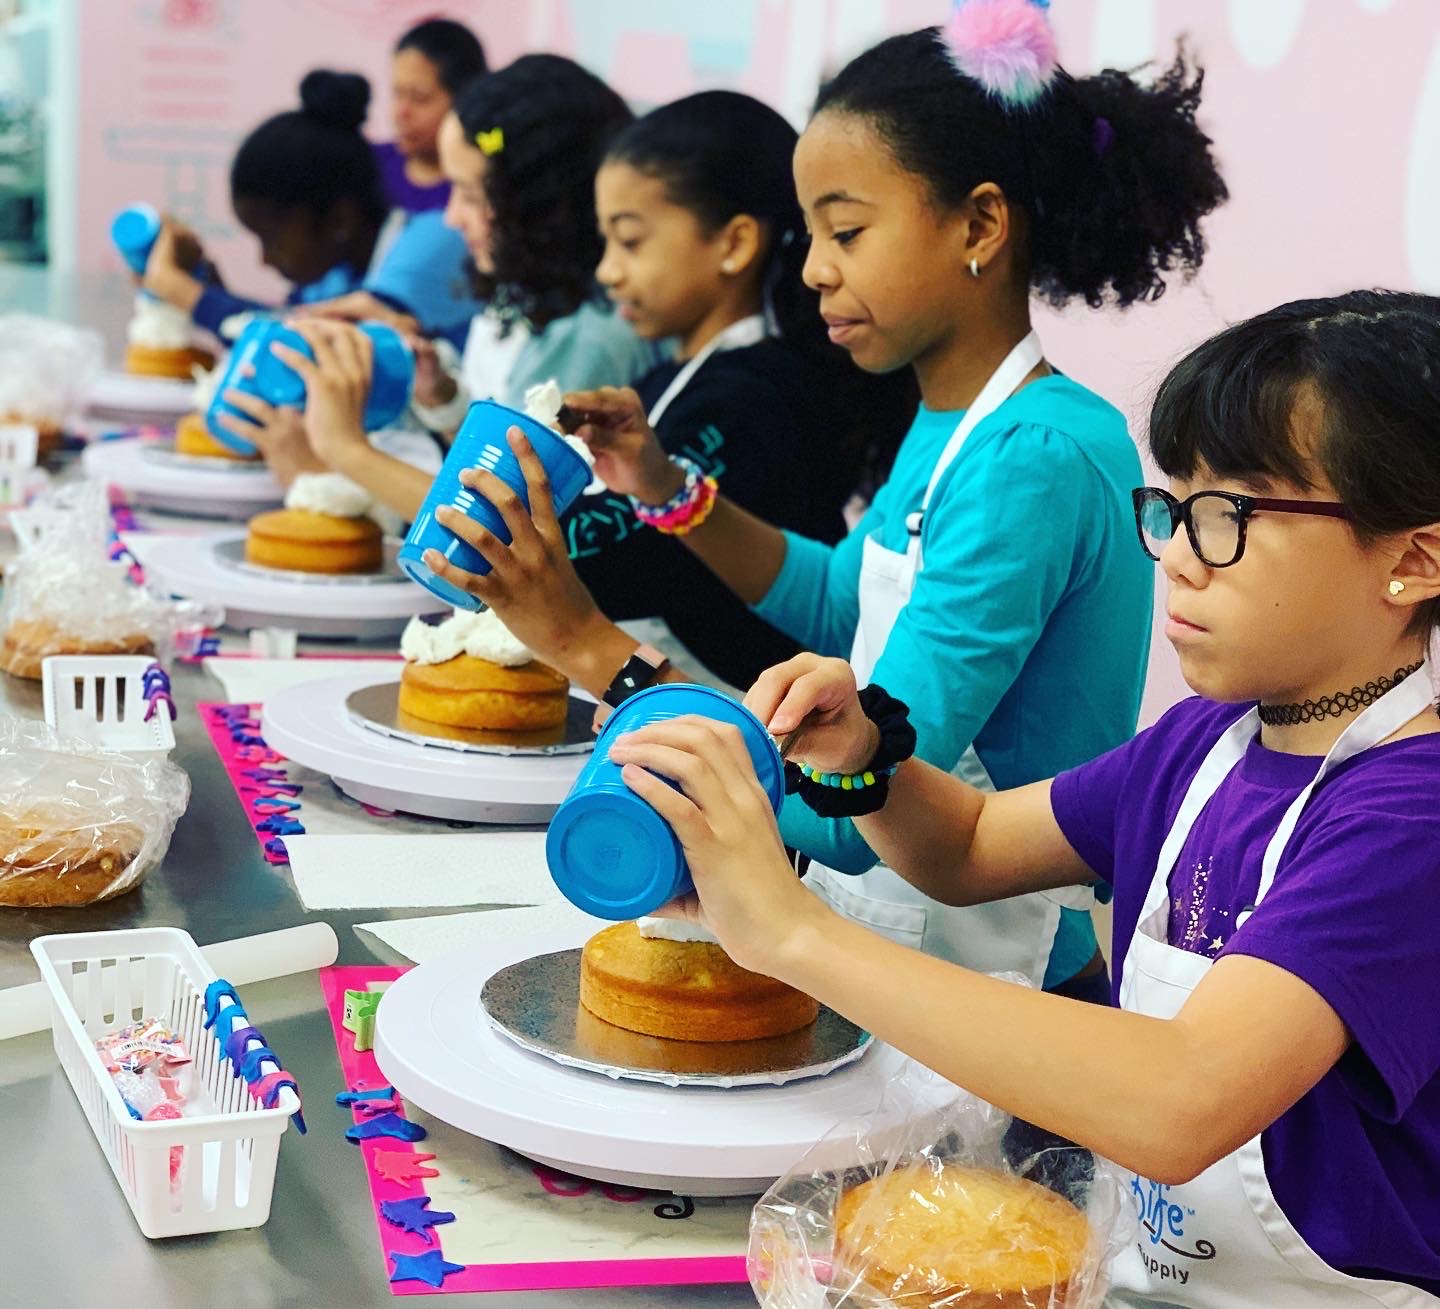 Children decorating cakes during baking class